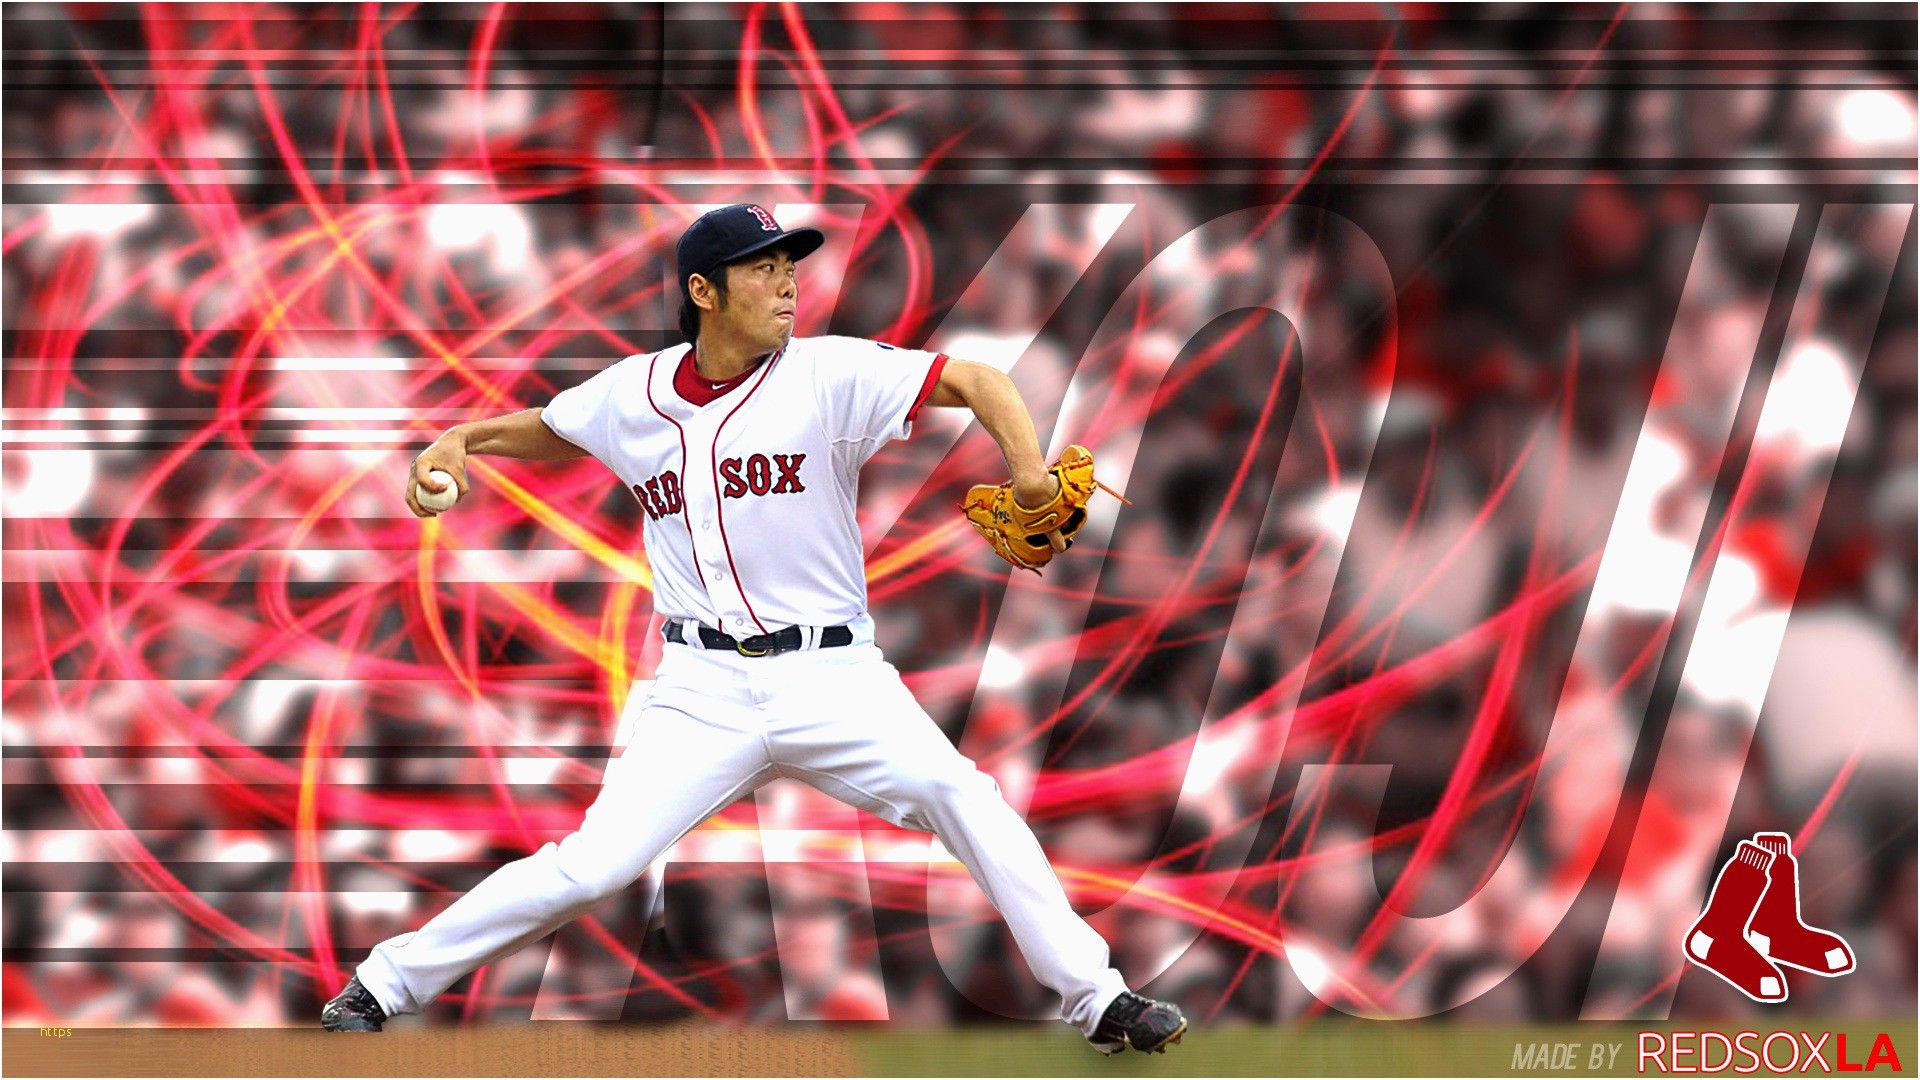 1920x1080 Red sox Wallpaper Best Of Boston Red sox Hd Wallpapers